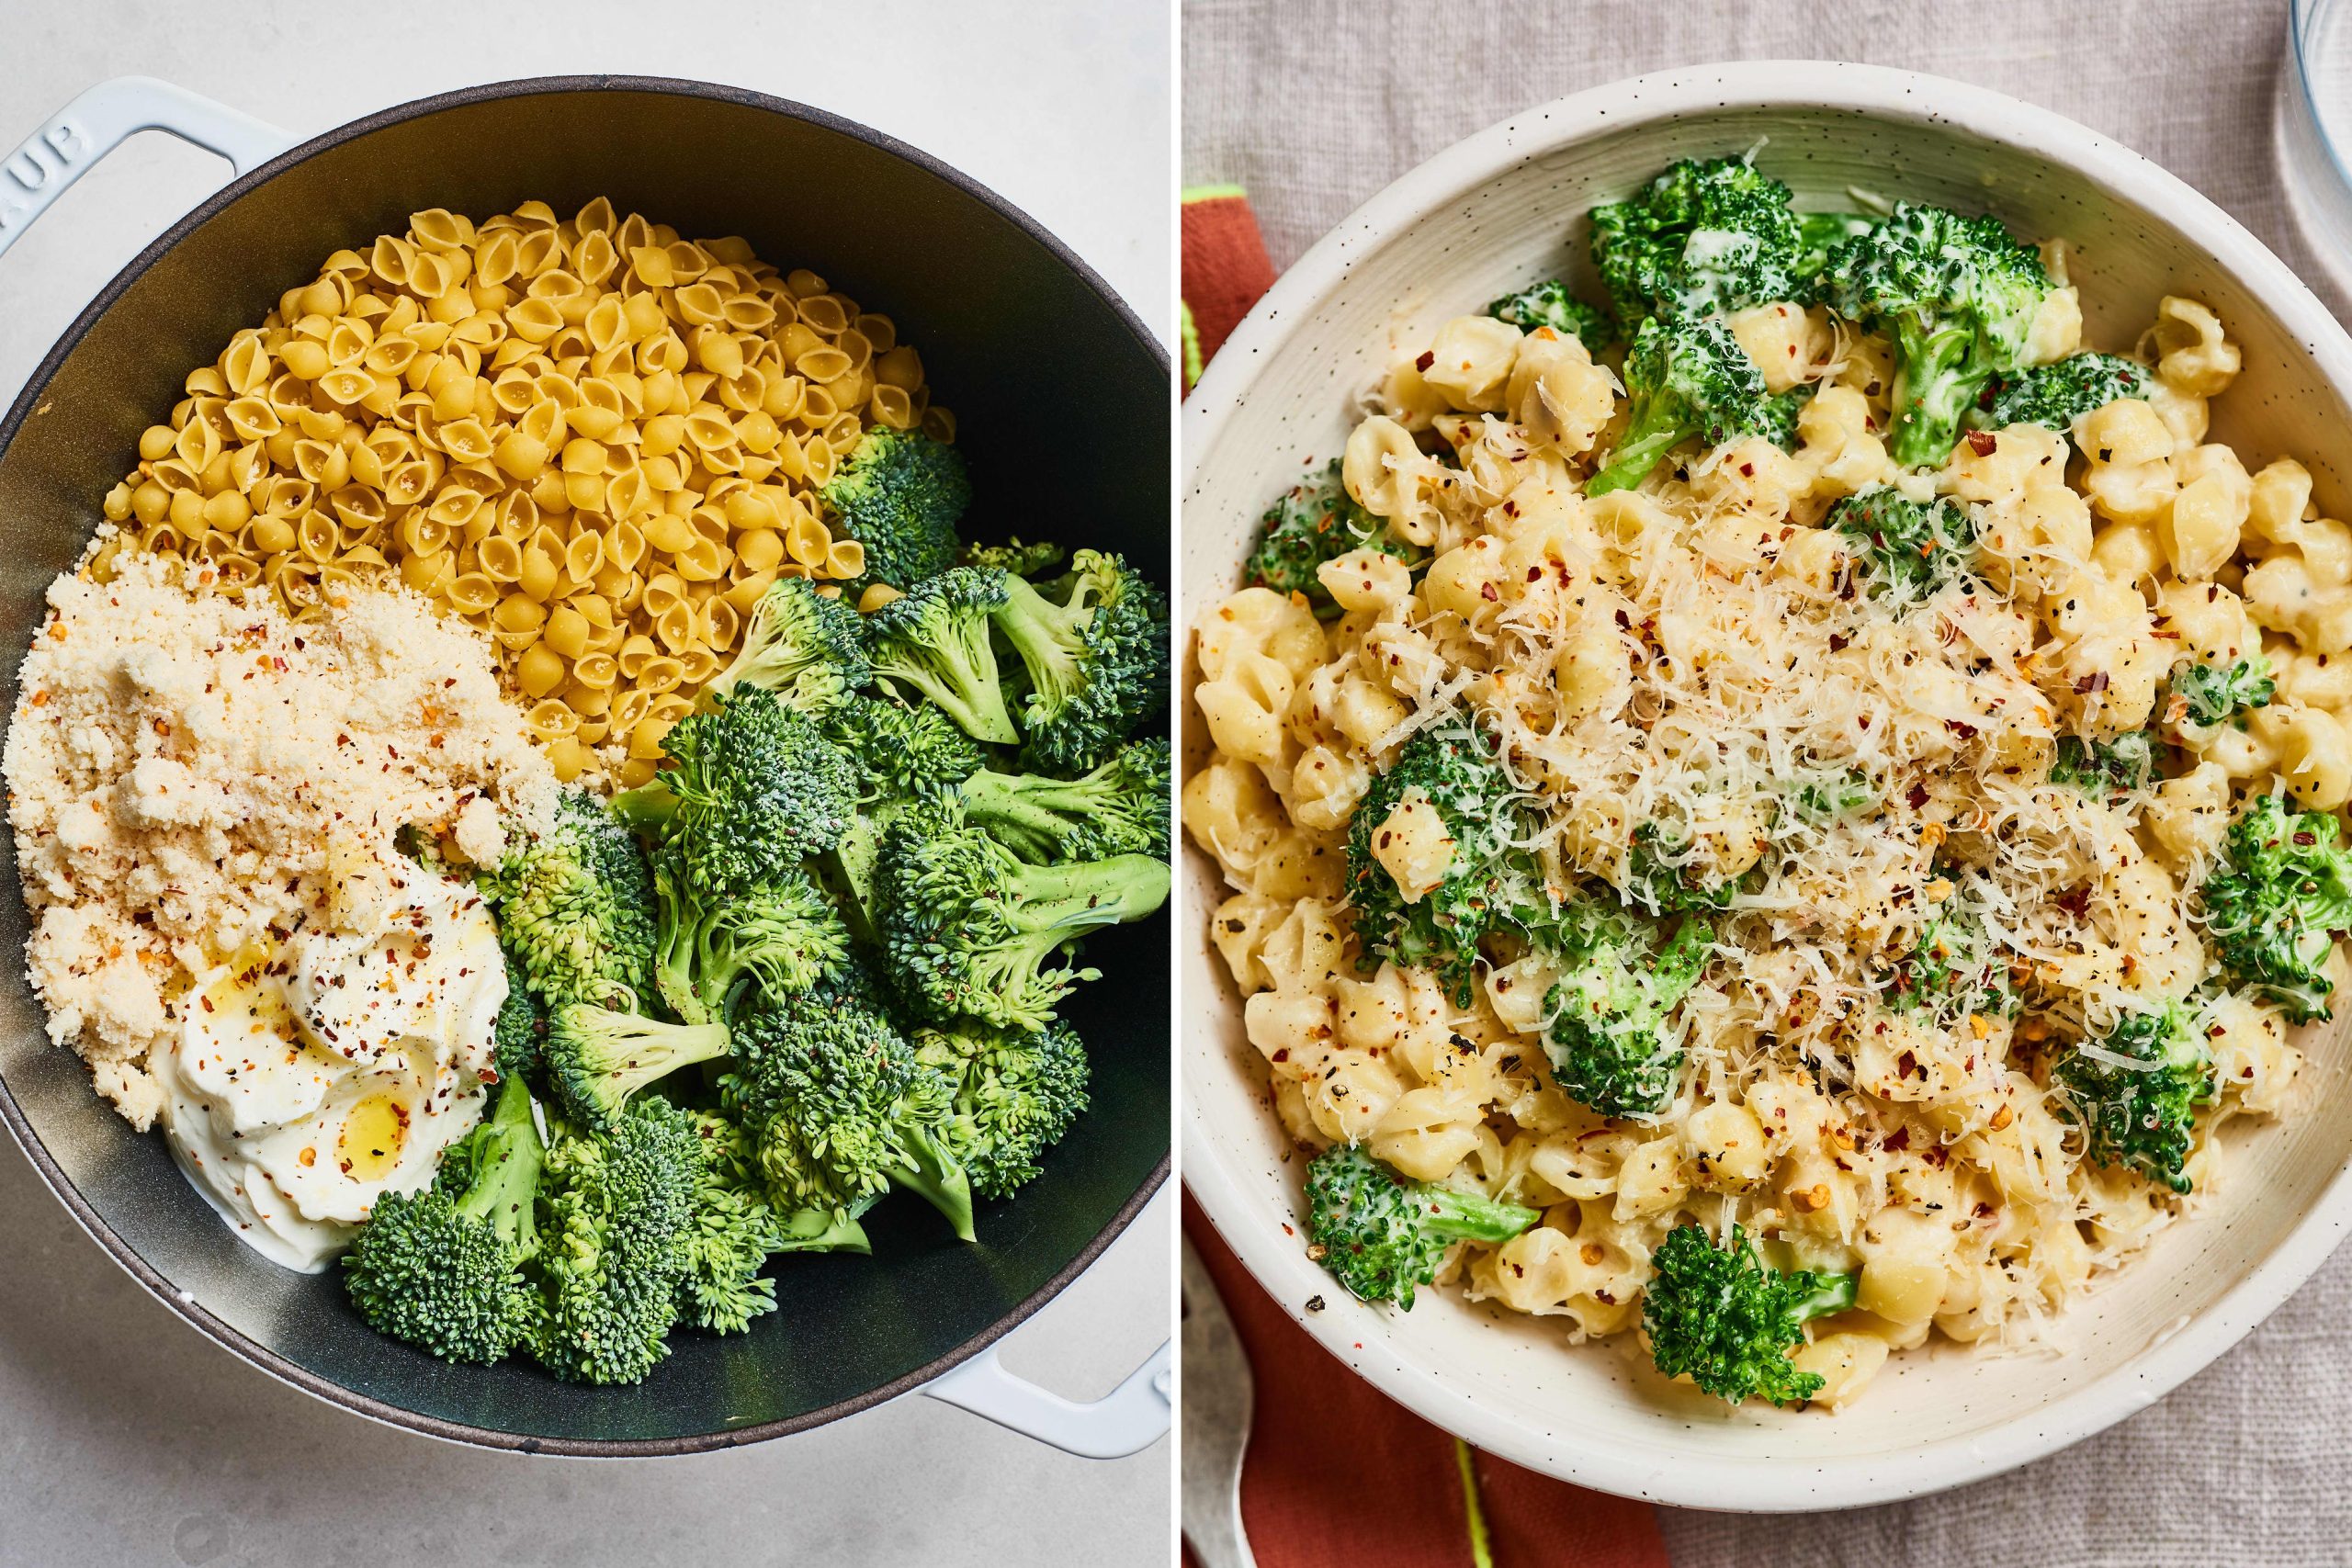 10 Delicious Vegetarian Recipes for Today's Meatless Monday